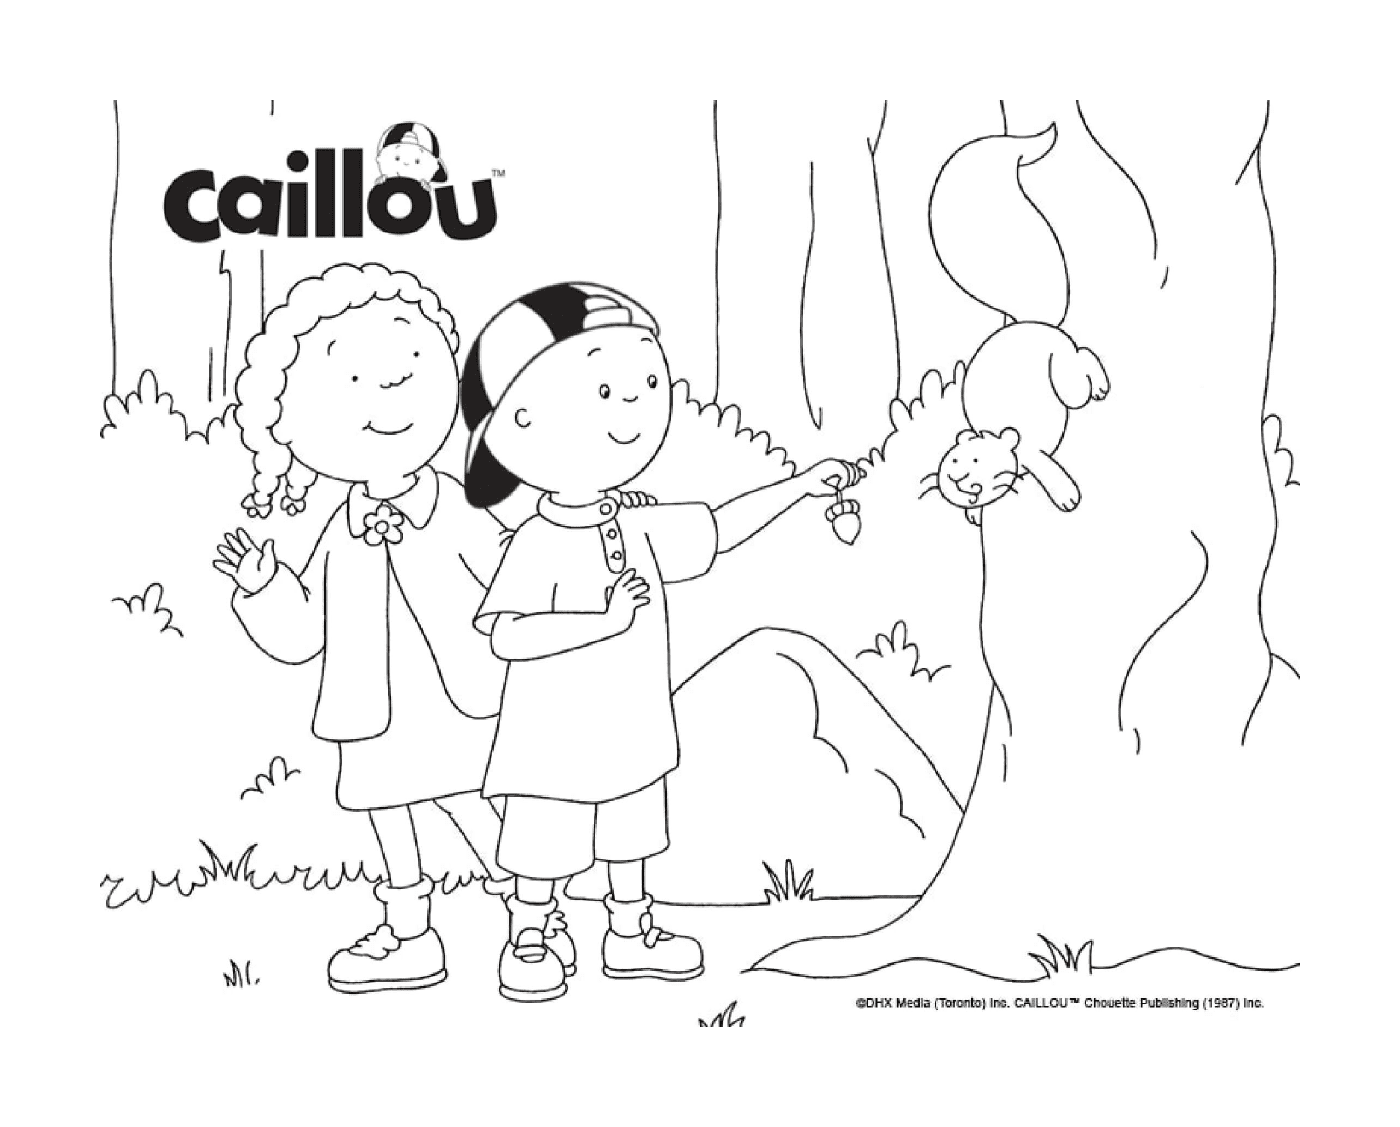  Caillou and Clementine with a squirrel in the park 